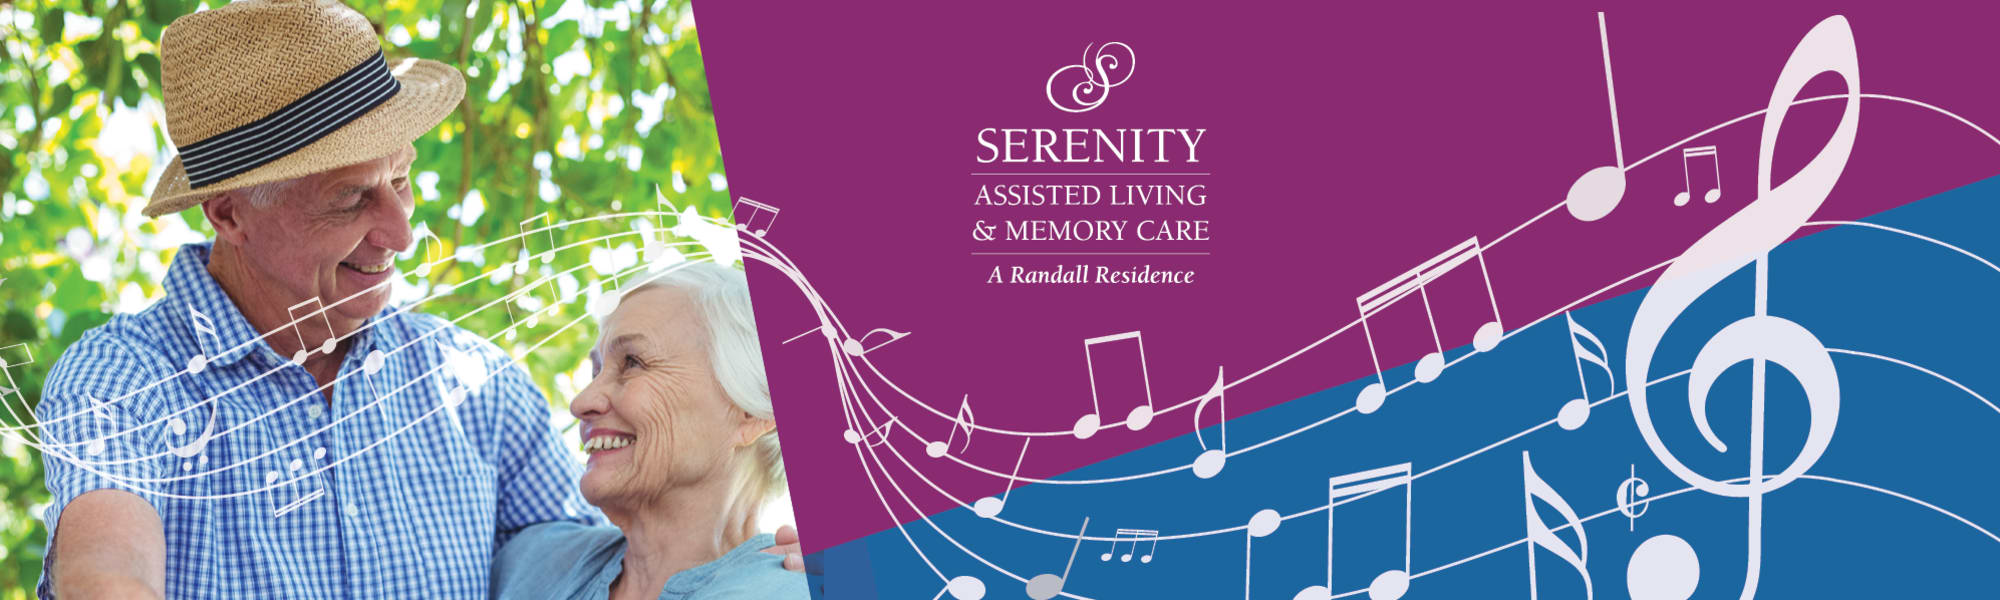 Events at Serenity in East Peoria, Illinois